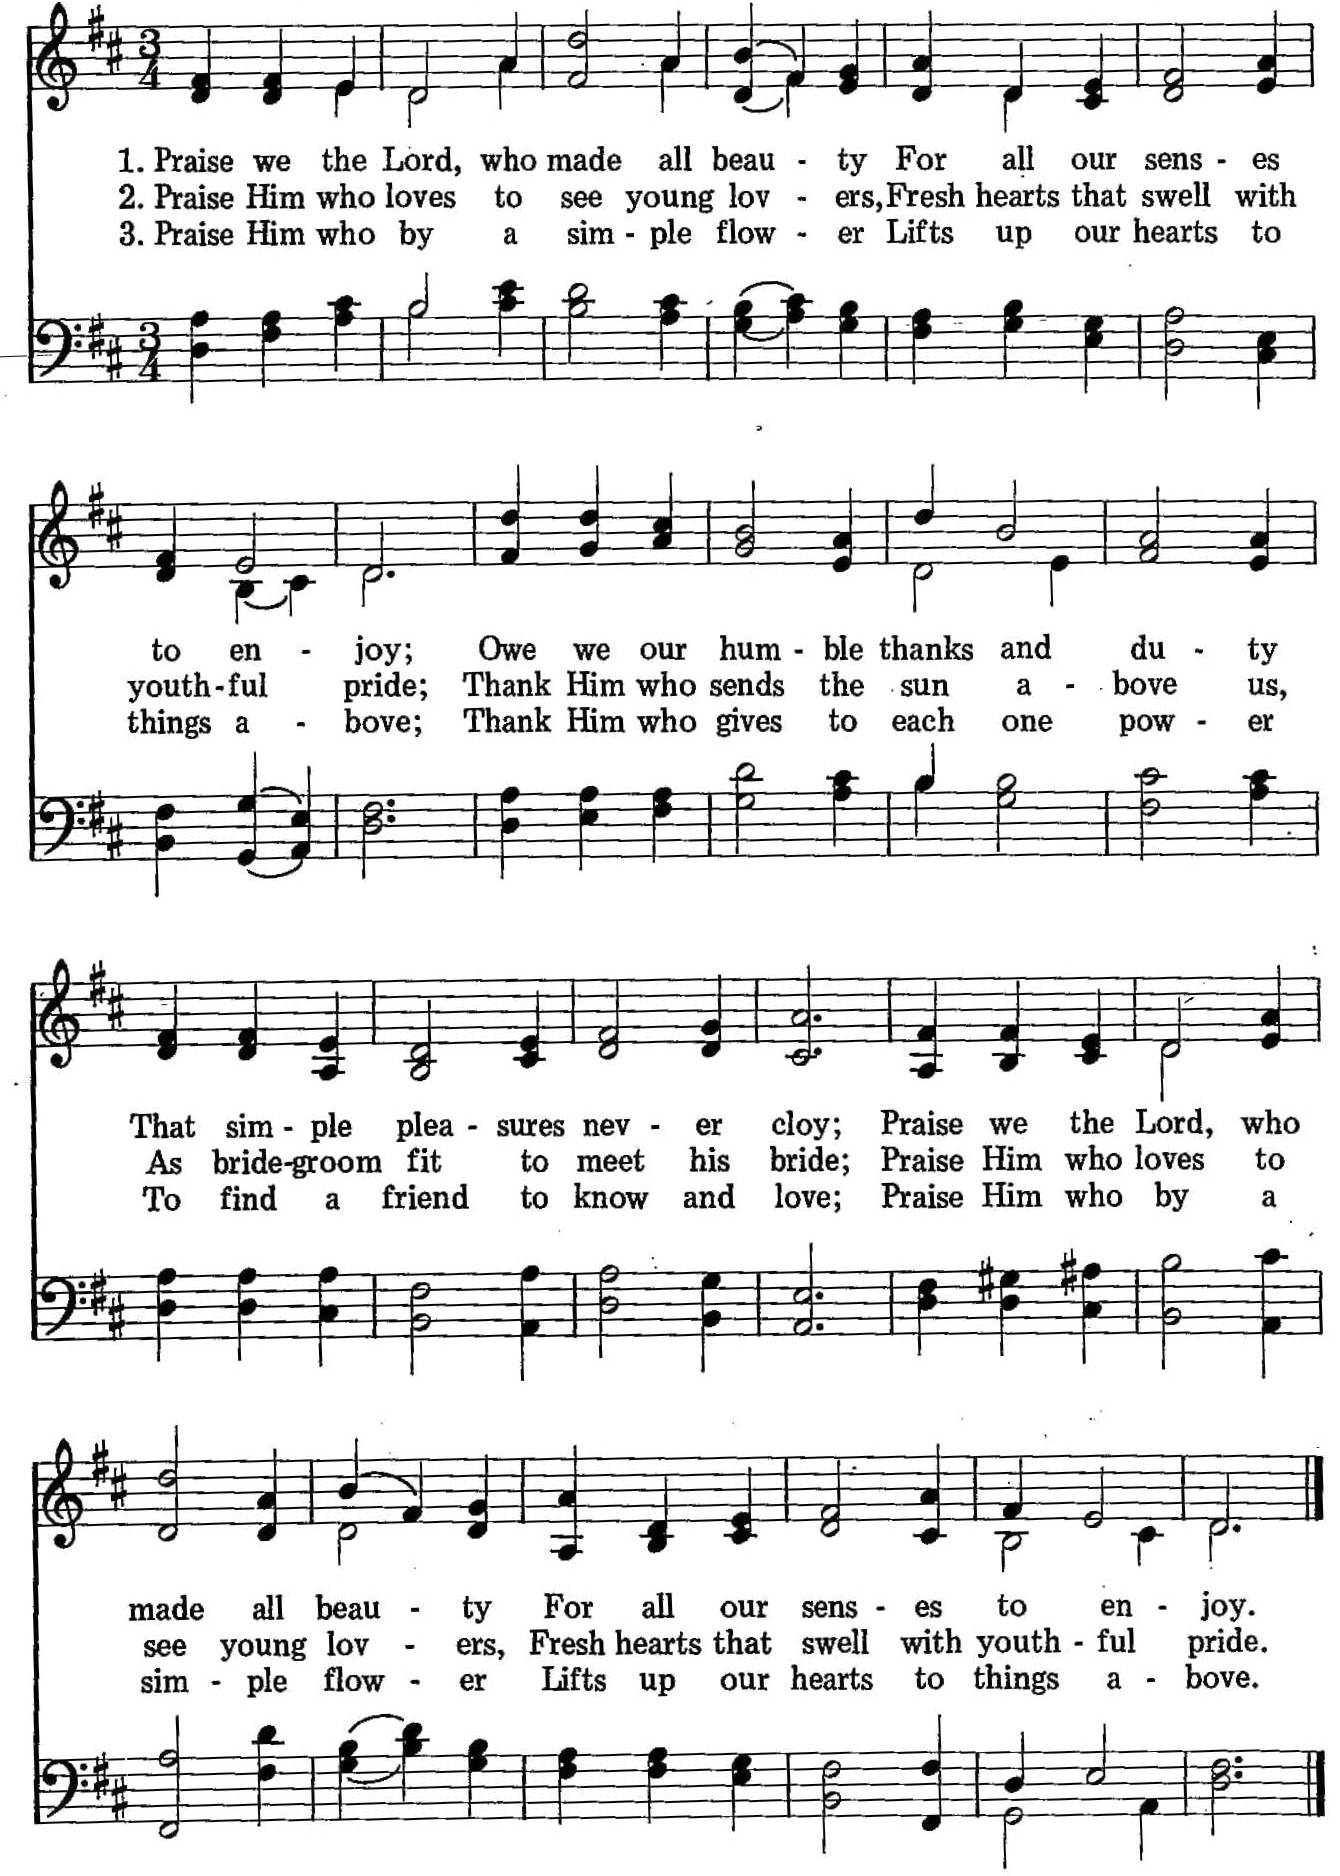 028 – Praise We the Lord sheet music